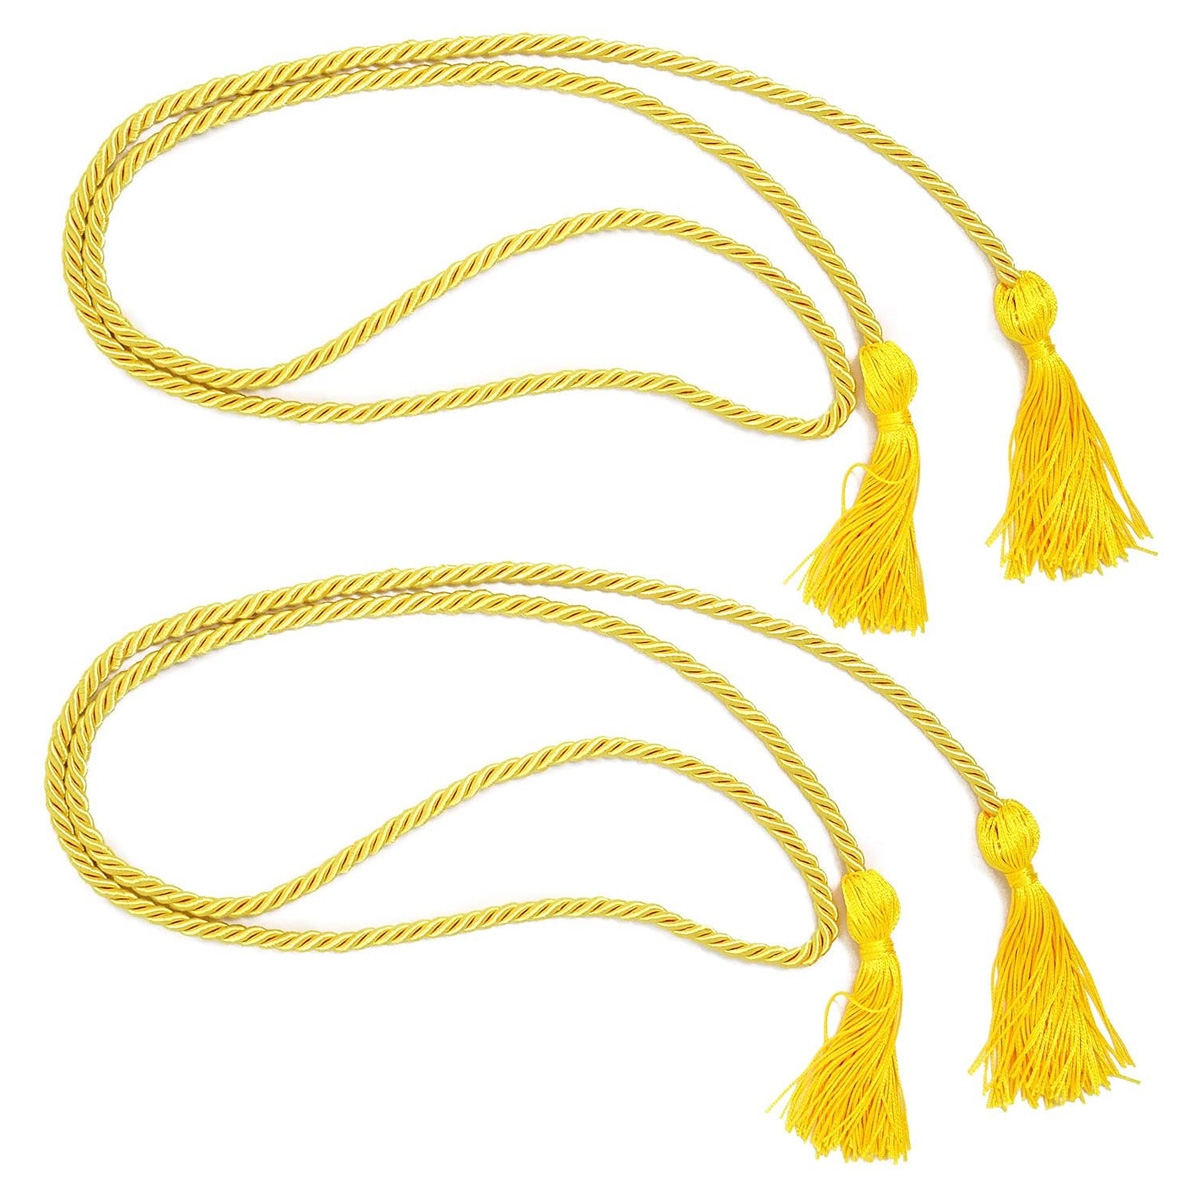 Polyester Yarn Graduation Honor Cords Gold Honor Braided Cords Graduation Decoration with Tassel for